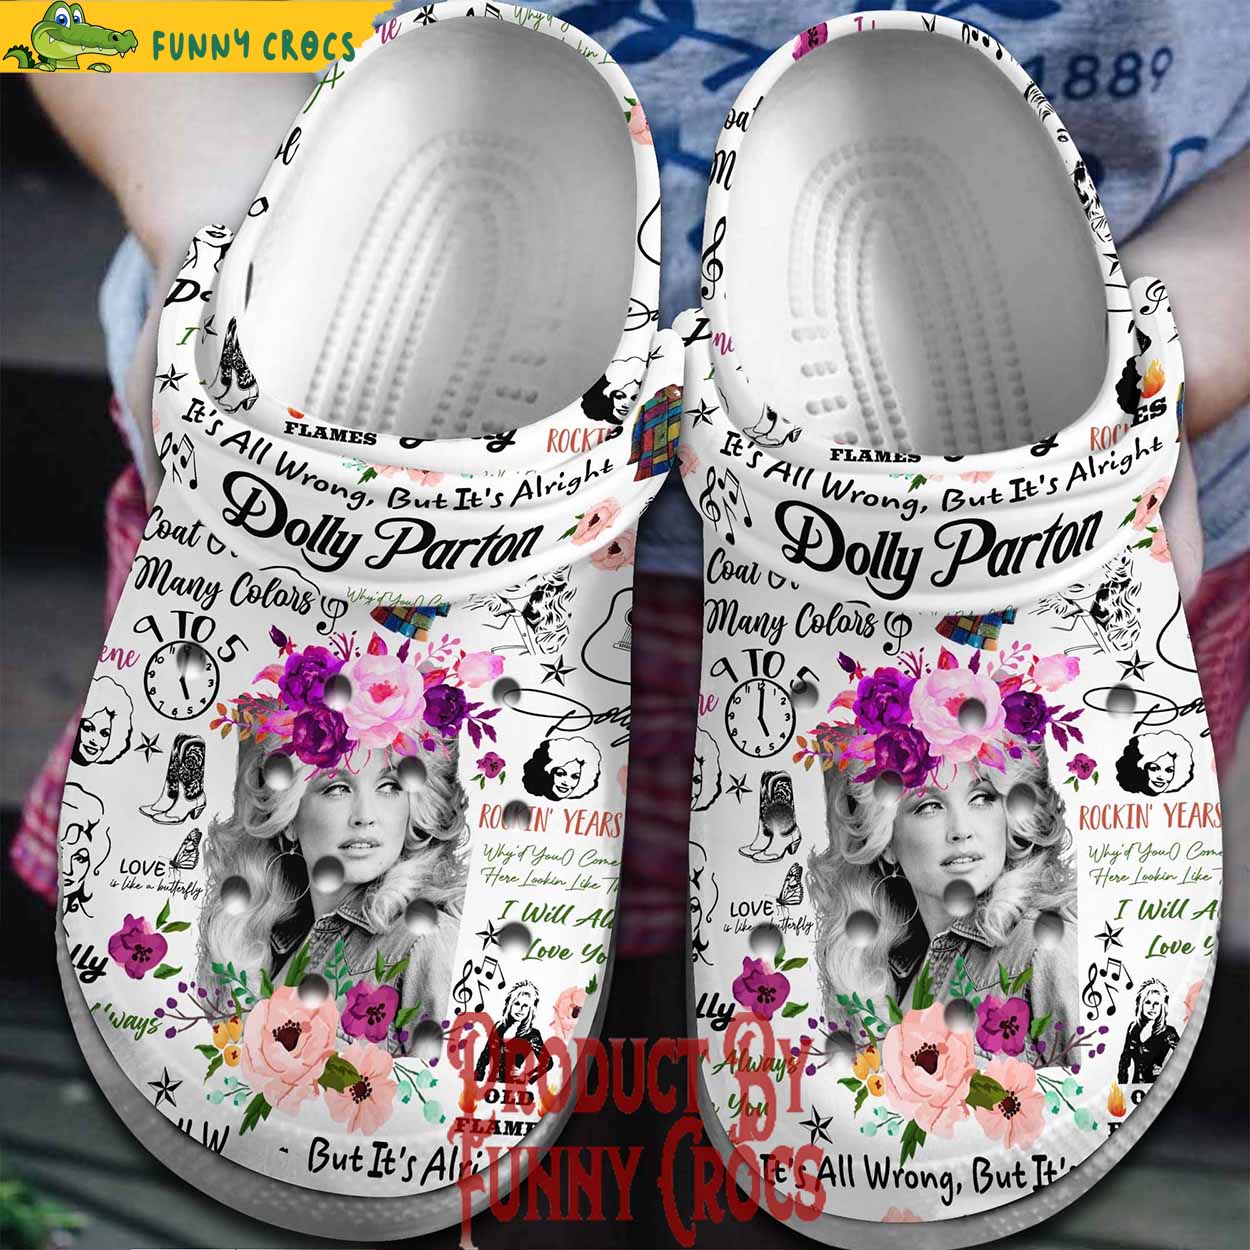 Dolly Parton Rose Crocs Shoes - Discover Comfort And Style Clog Shoes ...